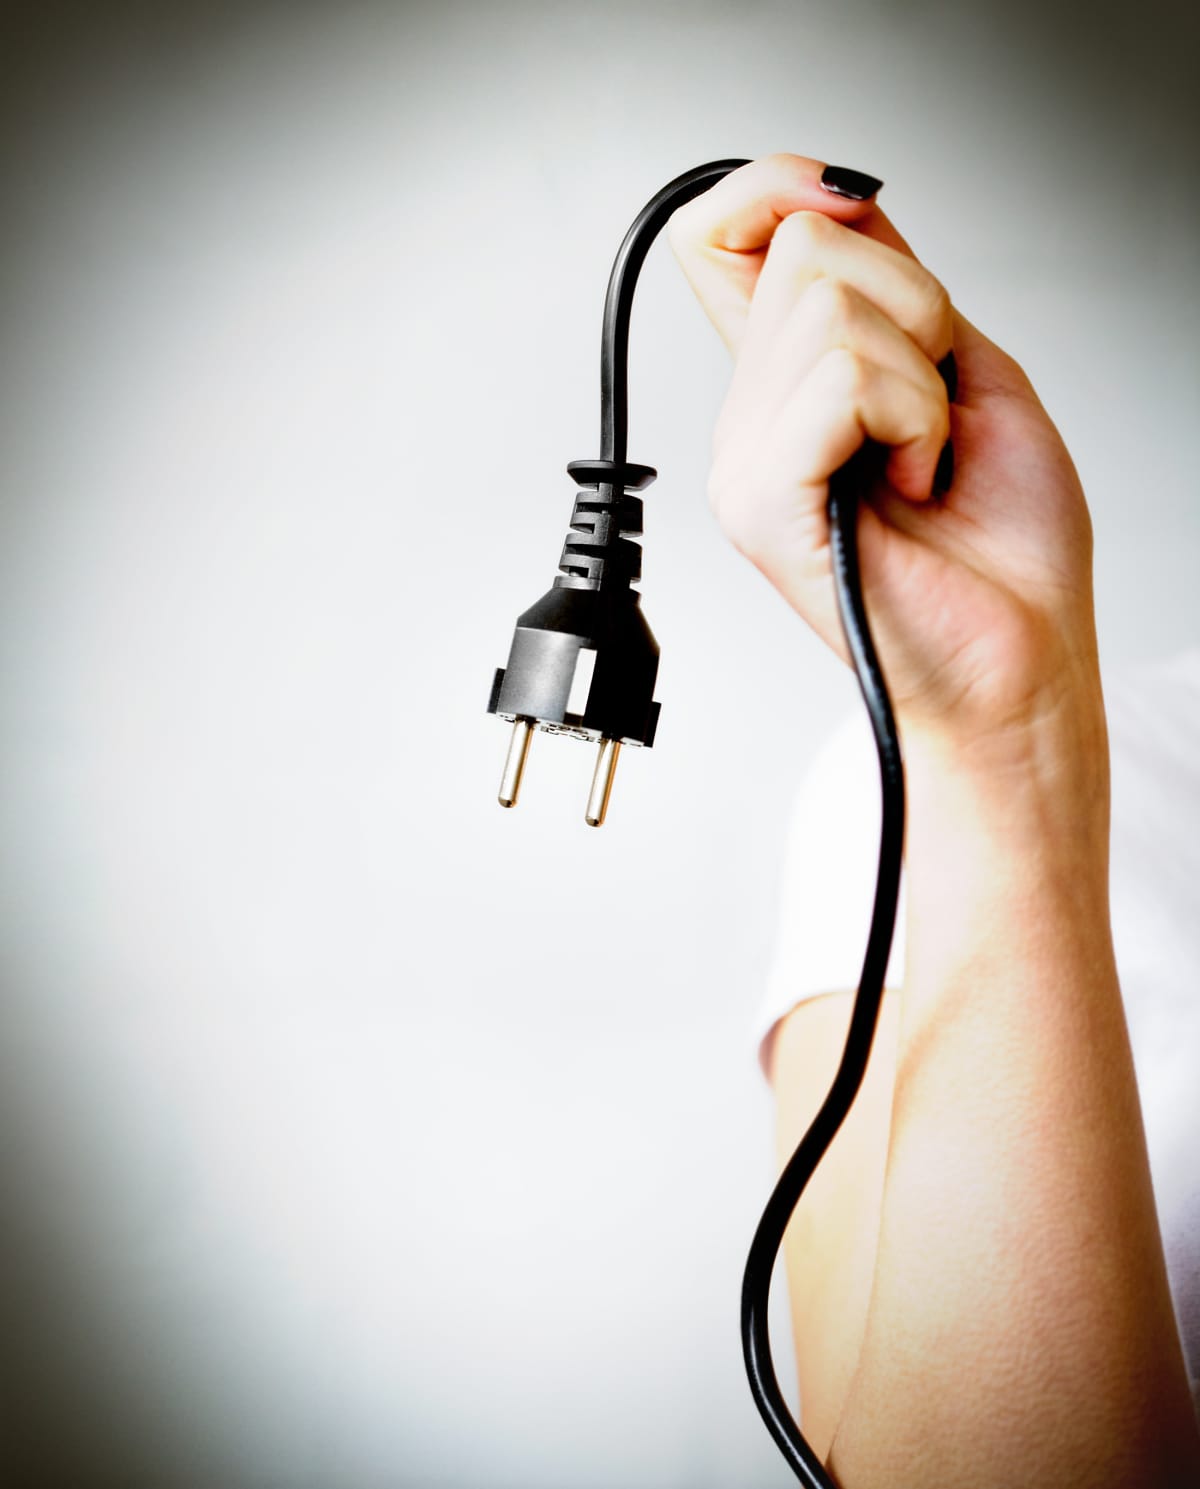 A person holding a plug cable